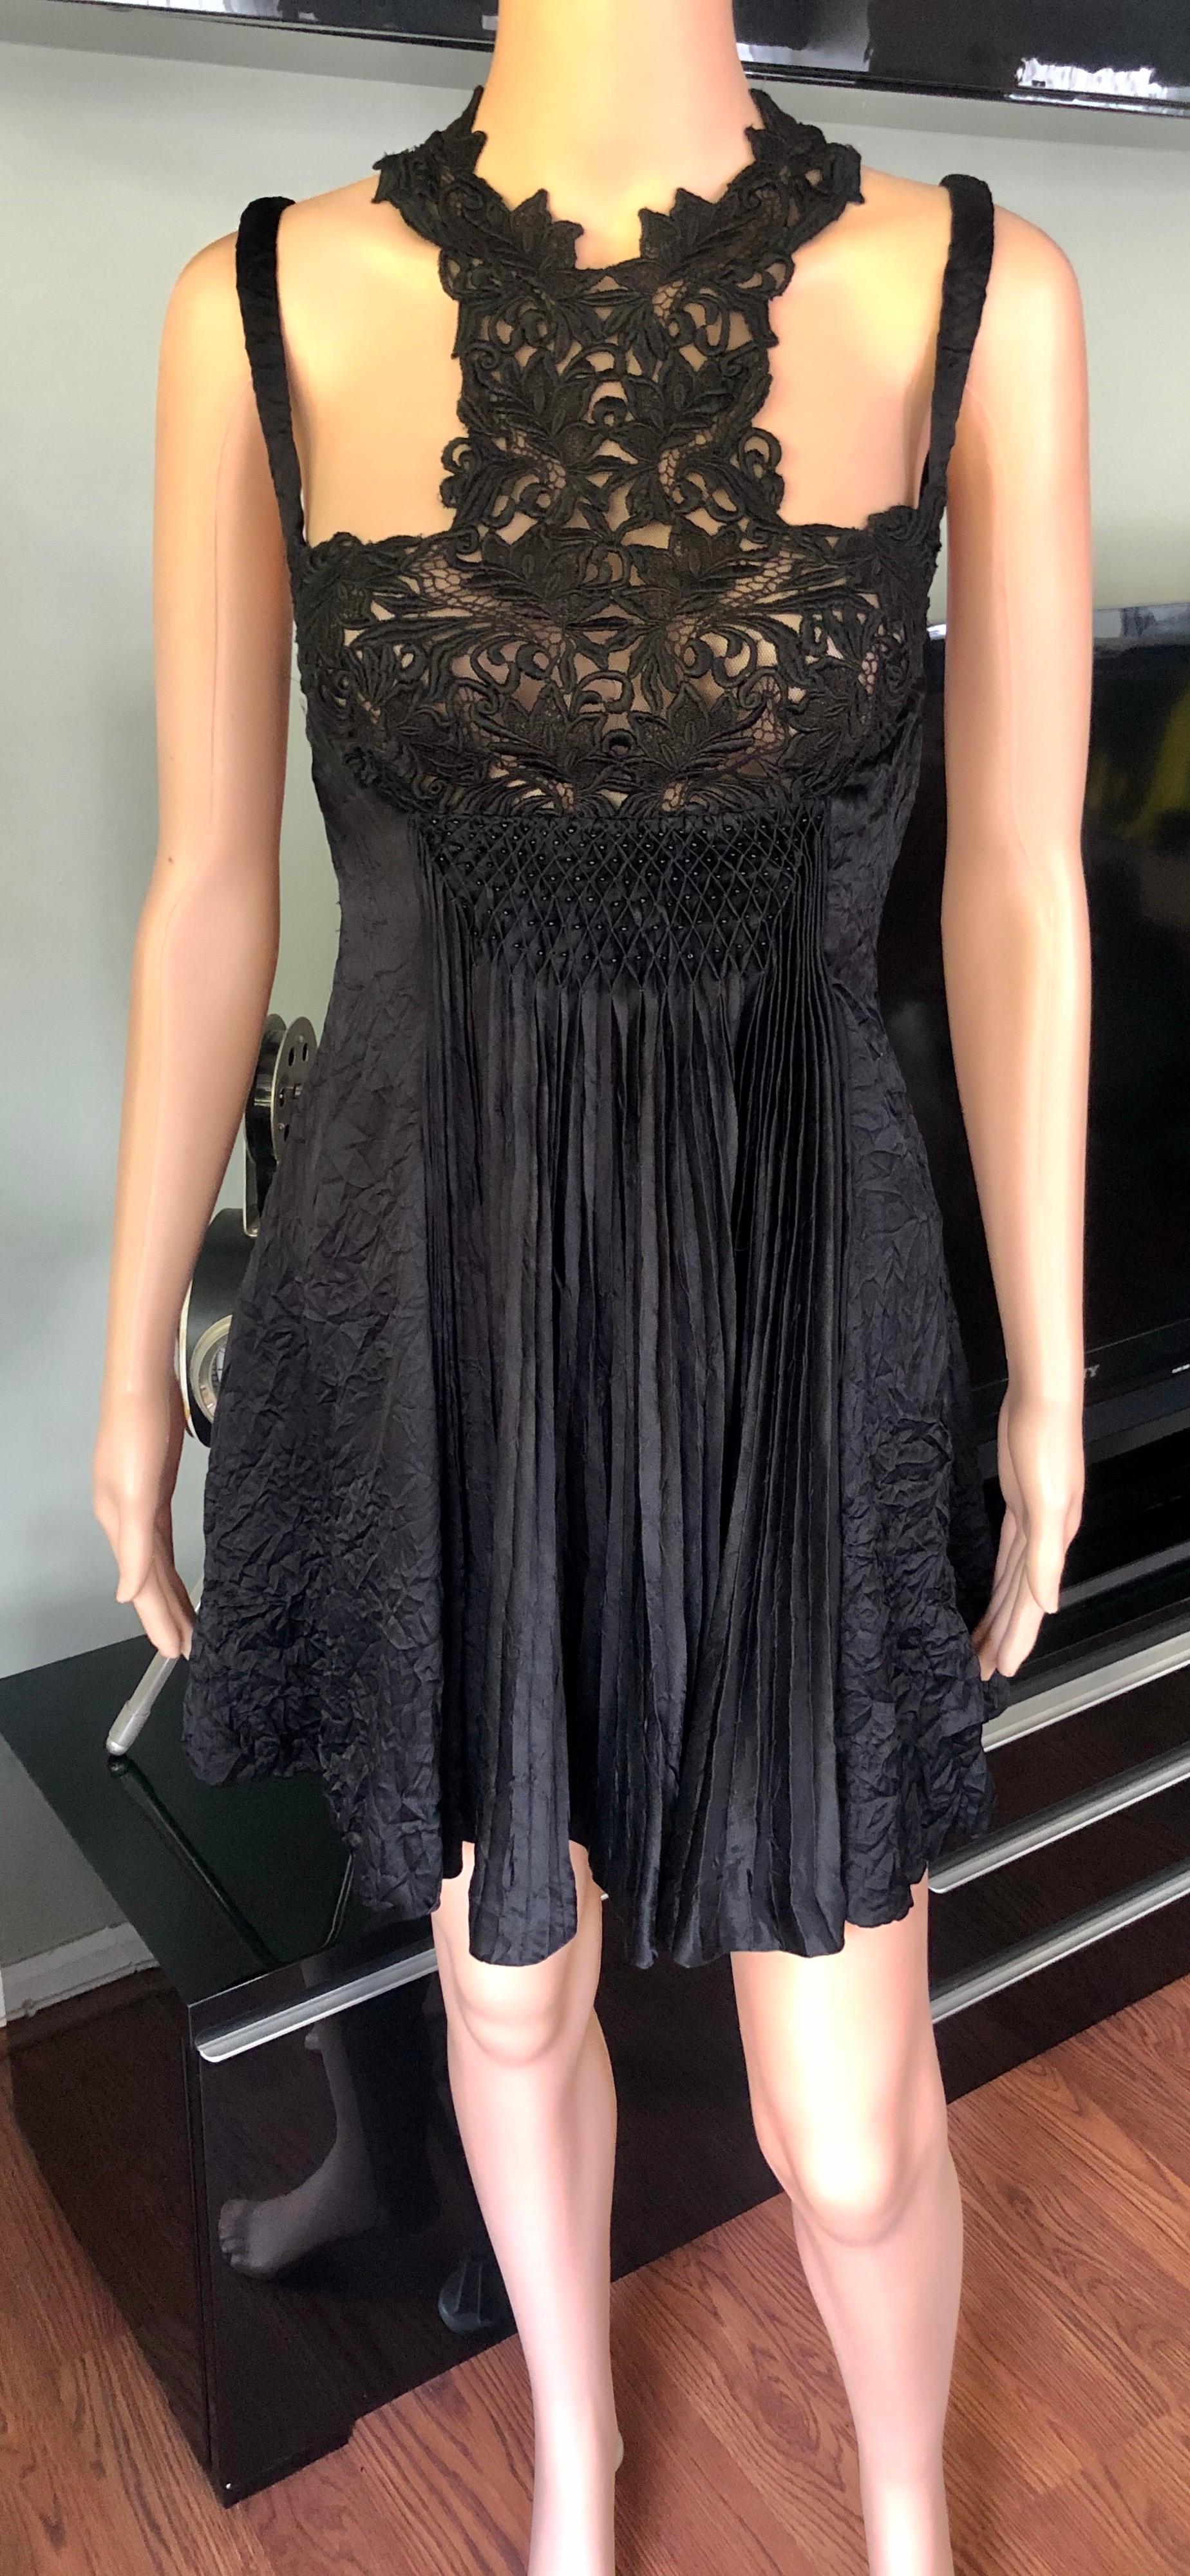 Gianni Versace S/S 1994 Runway Couture Vintage Crinkle Silk Lace Black Dress In Good Condition For Sale In Naples, FL